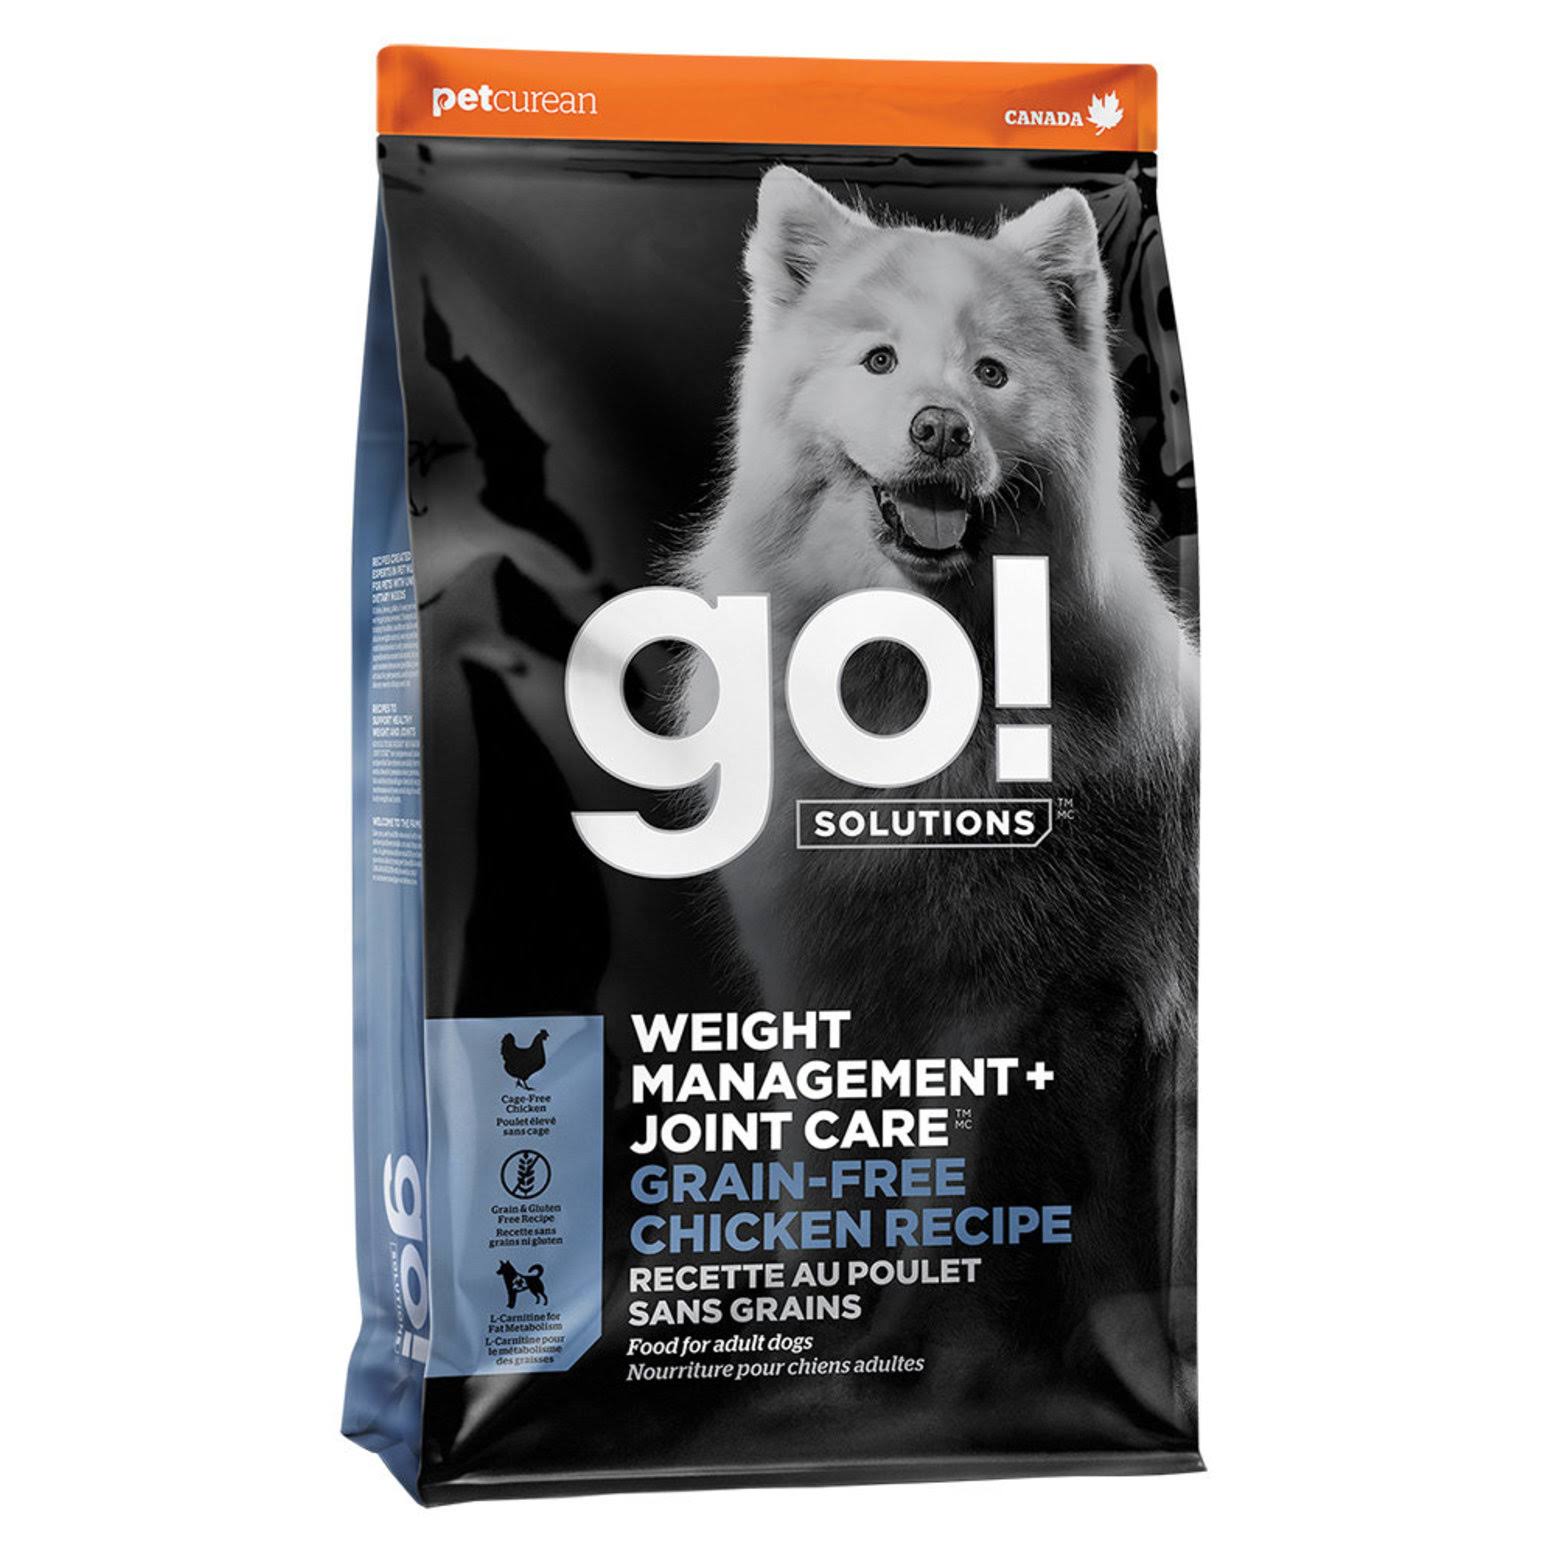 Go! Solutions Weight Management and Joint Care Grain-Free Chicken - 3.5 lbs